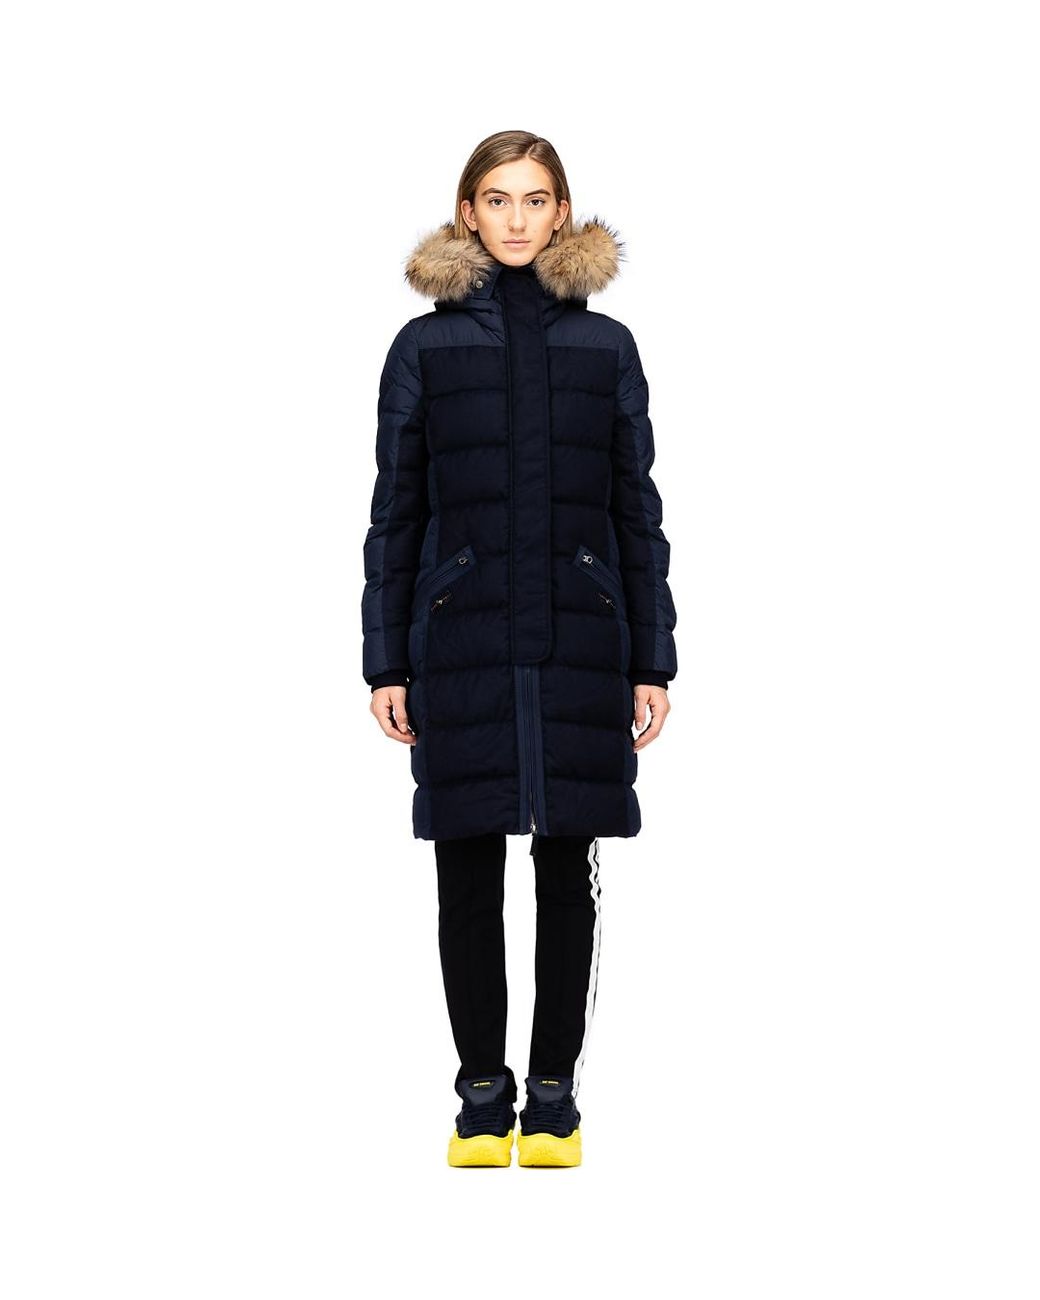 Parajumpers Wool Naomi Parka in Navy 